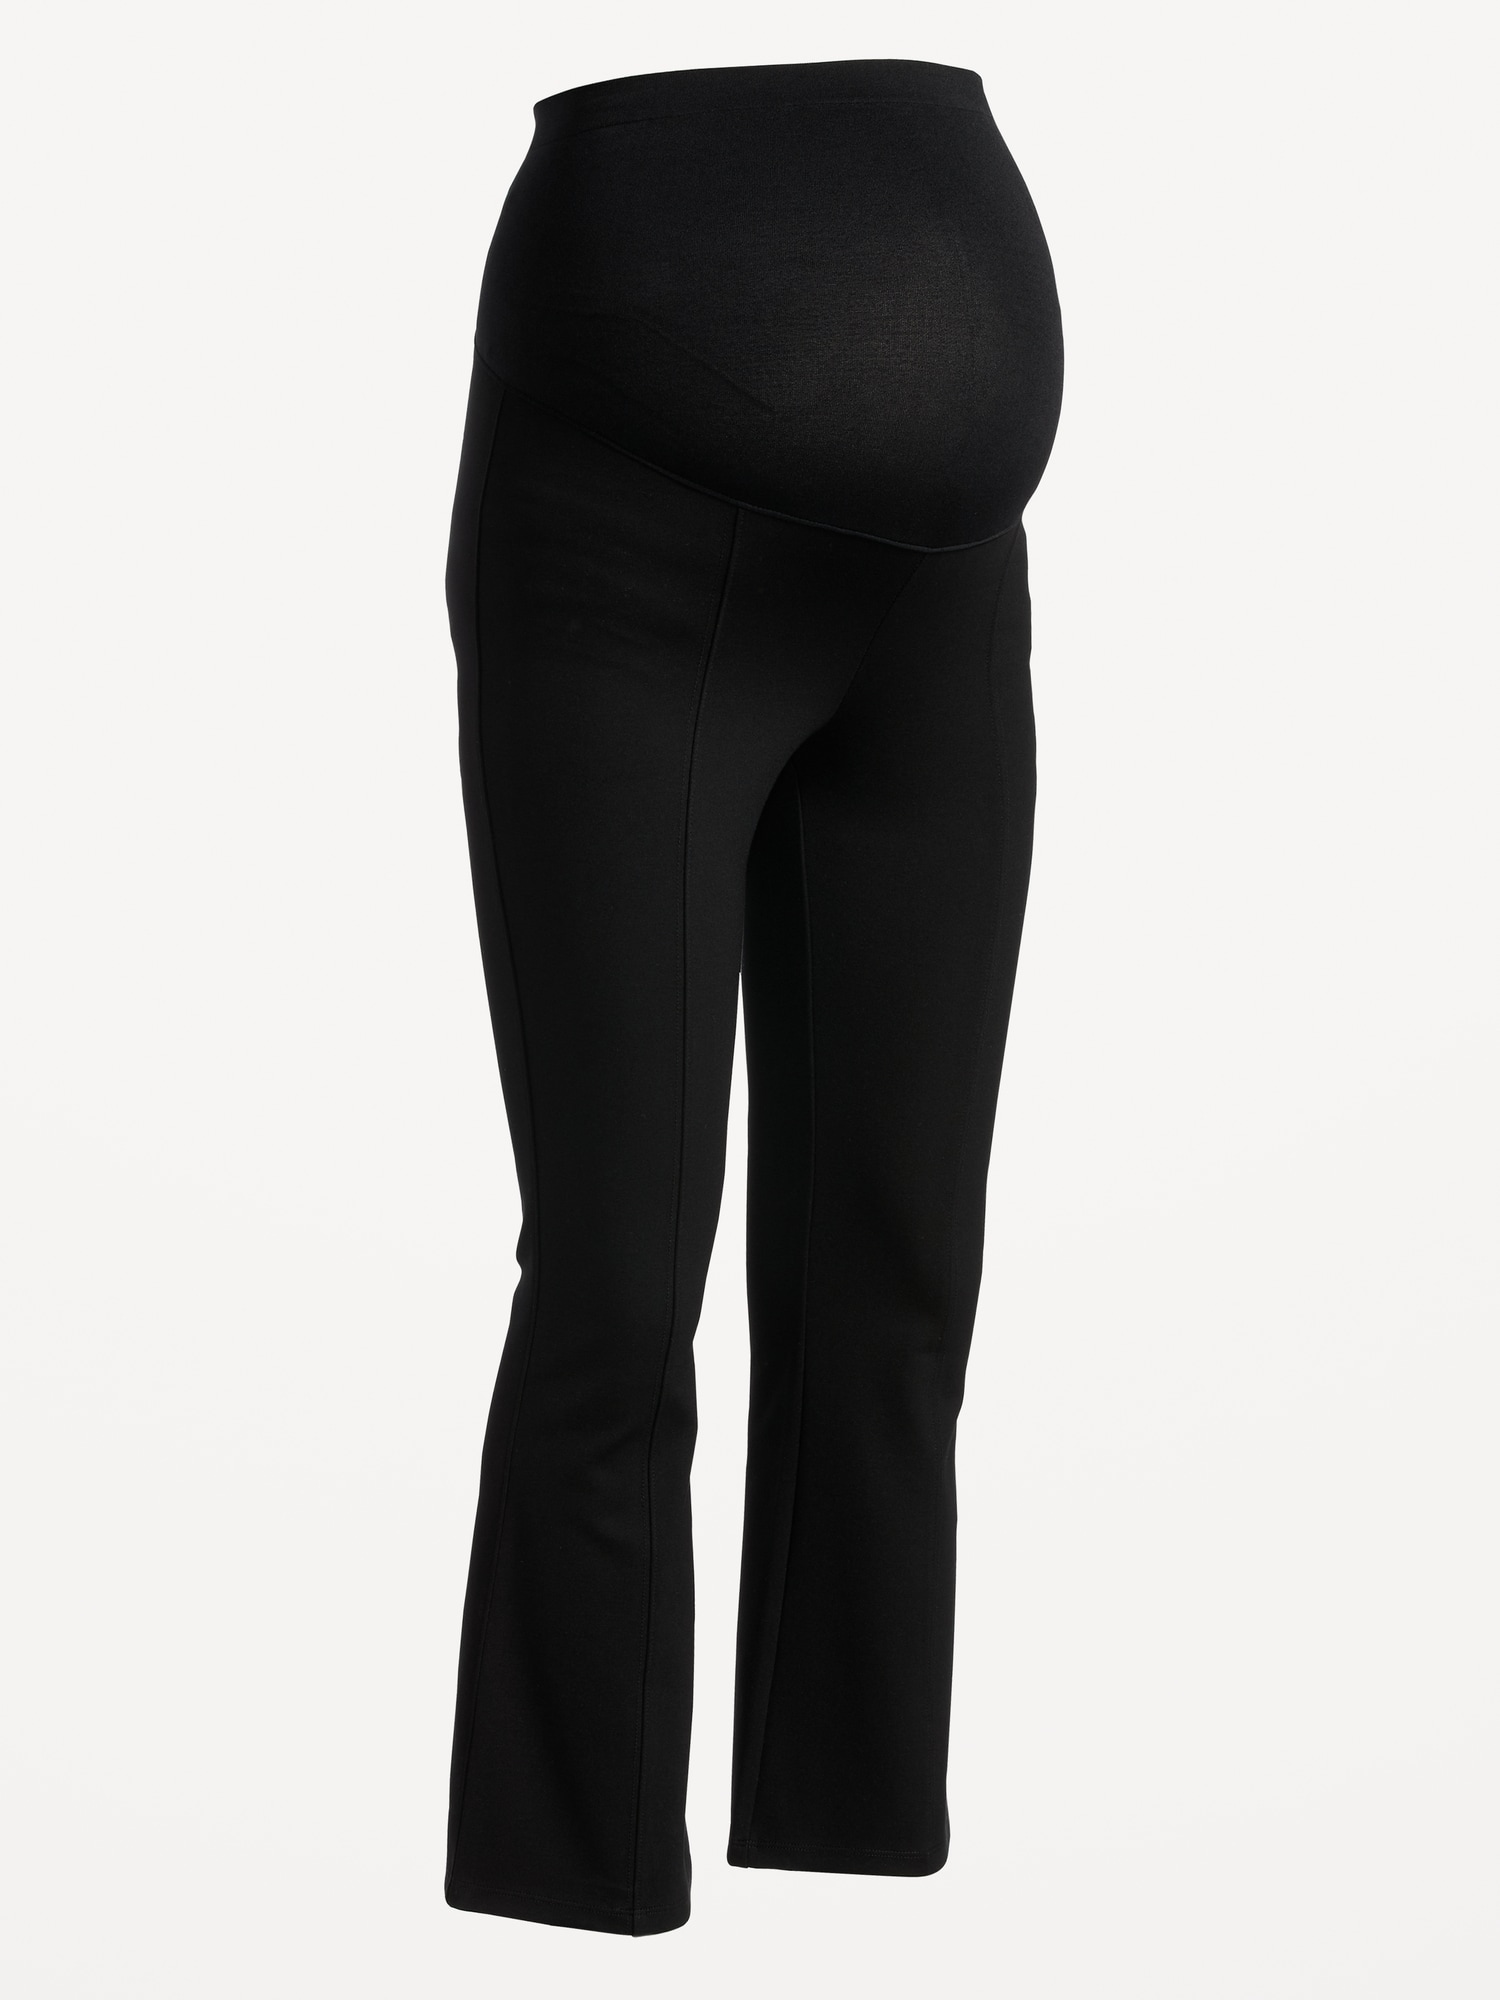 Over the Bump Cotton Flare Maternity Pants - Navy Blue